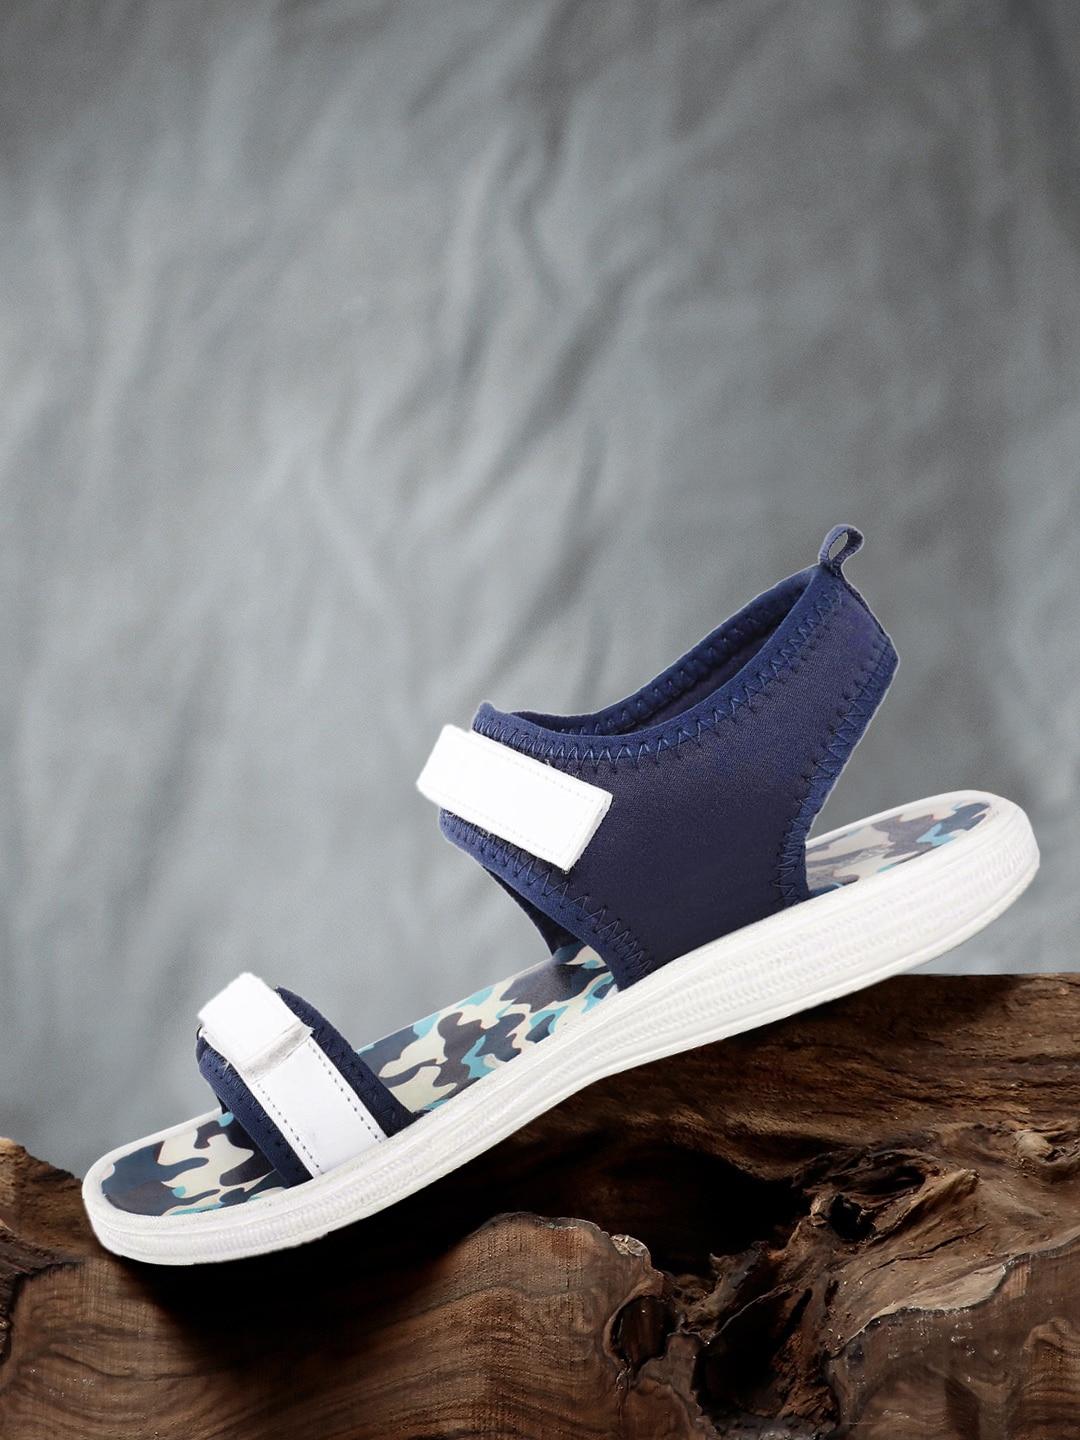 the-roadster-lifestyle-co-women-white--navy-blue-colourblocked-sports-sandals